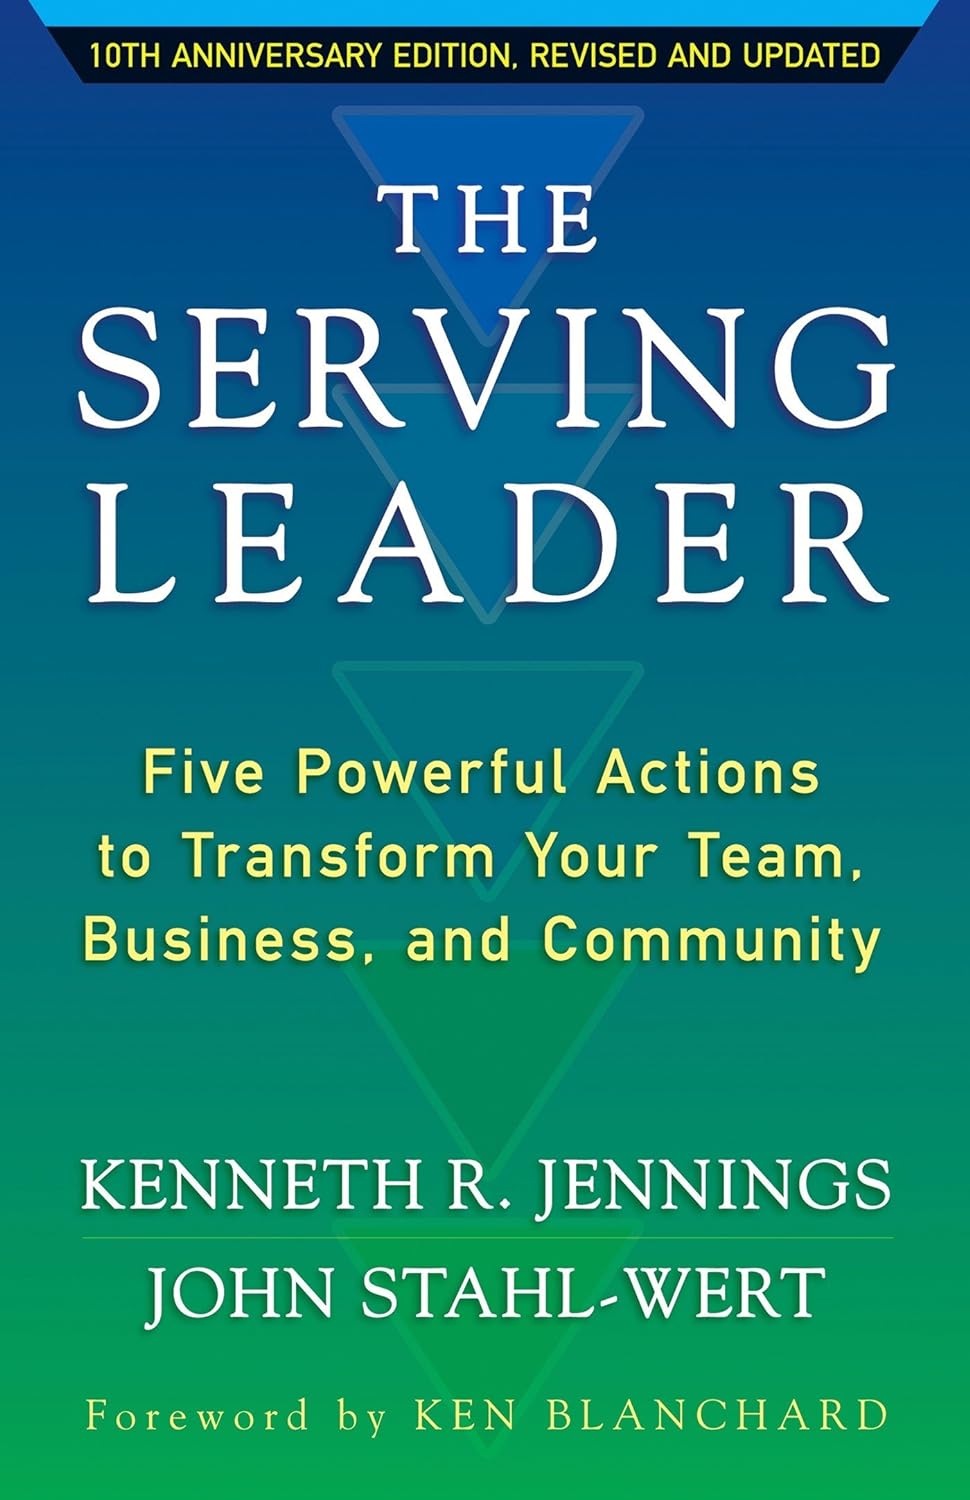 books about servant leadership13